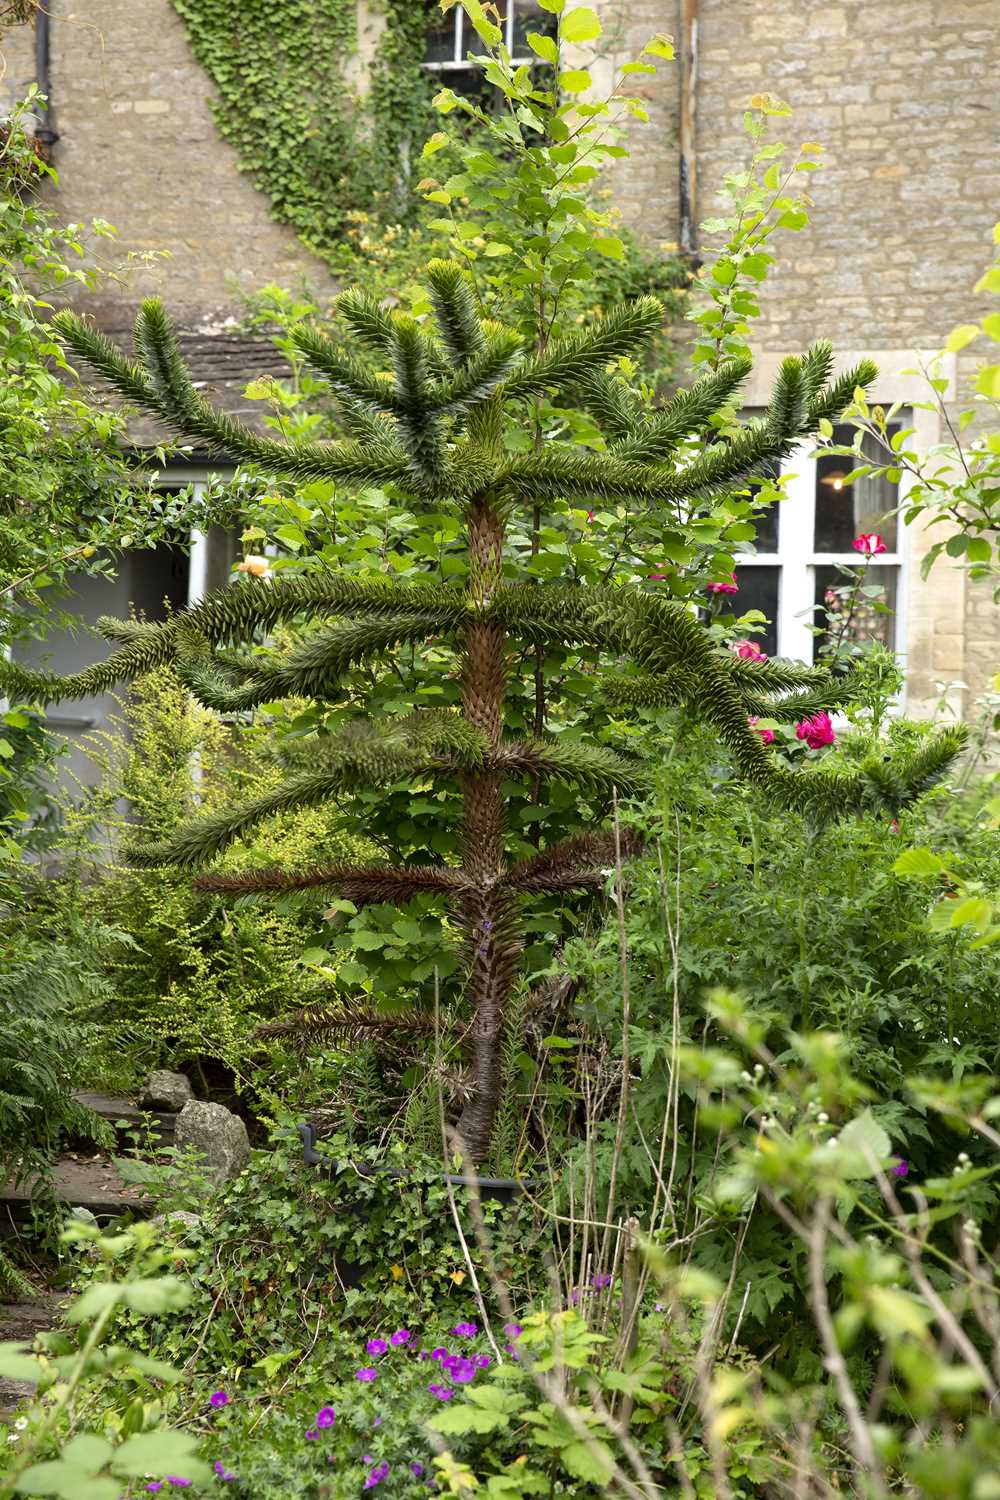 A Chilean pine, or 'Monkey Puzzle' tree, approximately 190cm overall